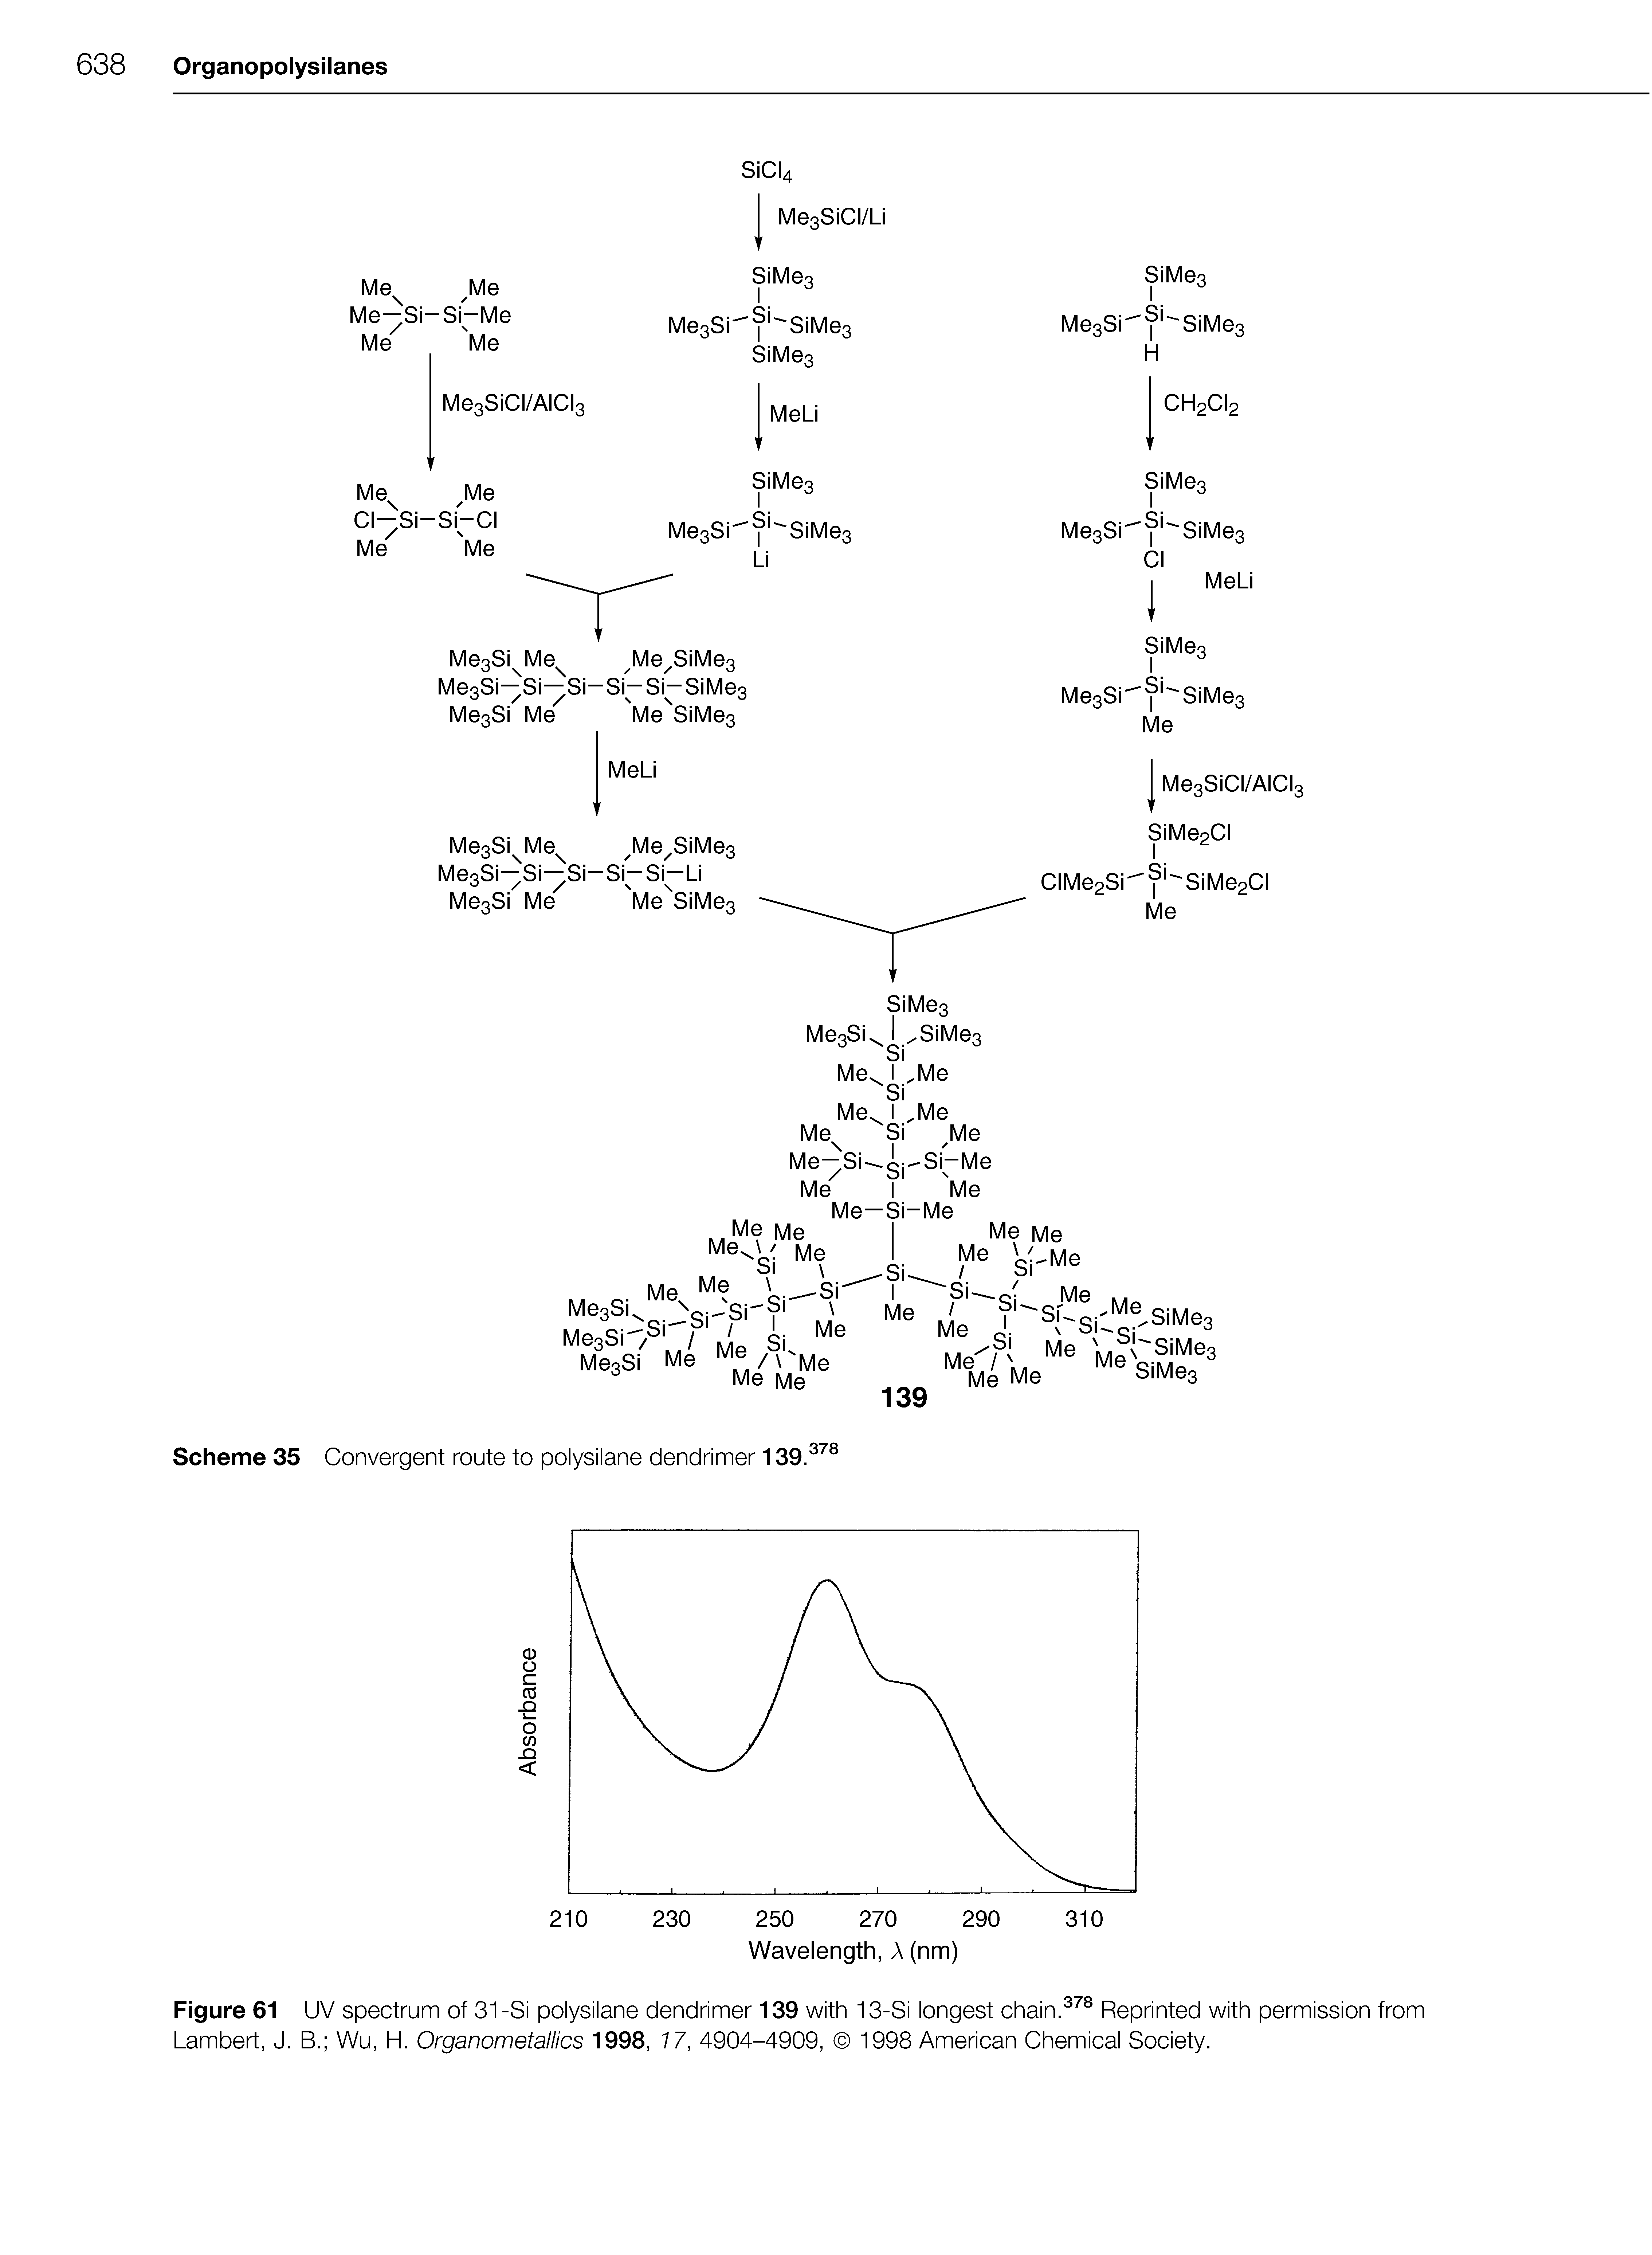 Figure 61 UV spectrum of 31-Si polysilane dendrimer 139 with 13-Si longest chain.378 Reprinted with permission from Lambert, J. B. Wu, H. Organometallics 1998, 17, 4904-4909, 1998 American Chemical Society.